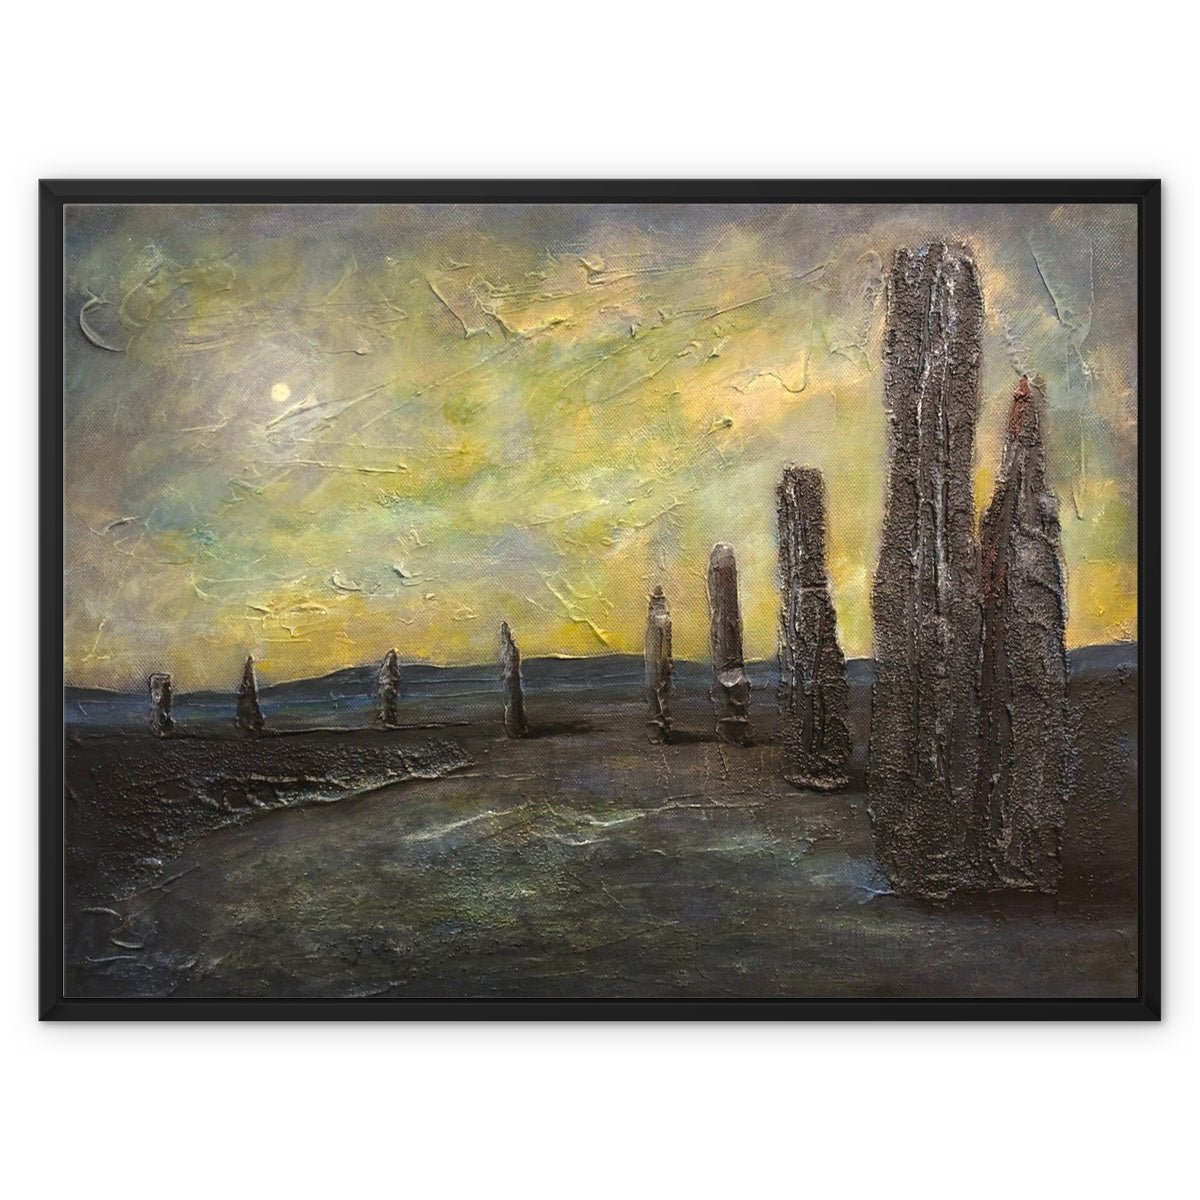 An Ethereal Ring Of Brodgar Orkney Painting | Framed Canvas-Floating Framed Canvas Prints-Orkney Art Gallery-32"x24"-Black Frame-Paintings, Prints, Homeware, Art Gifts From Scotland By Scottish Artist Kevin Hunter